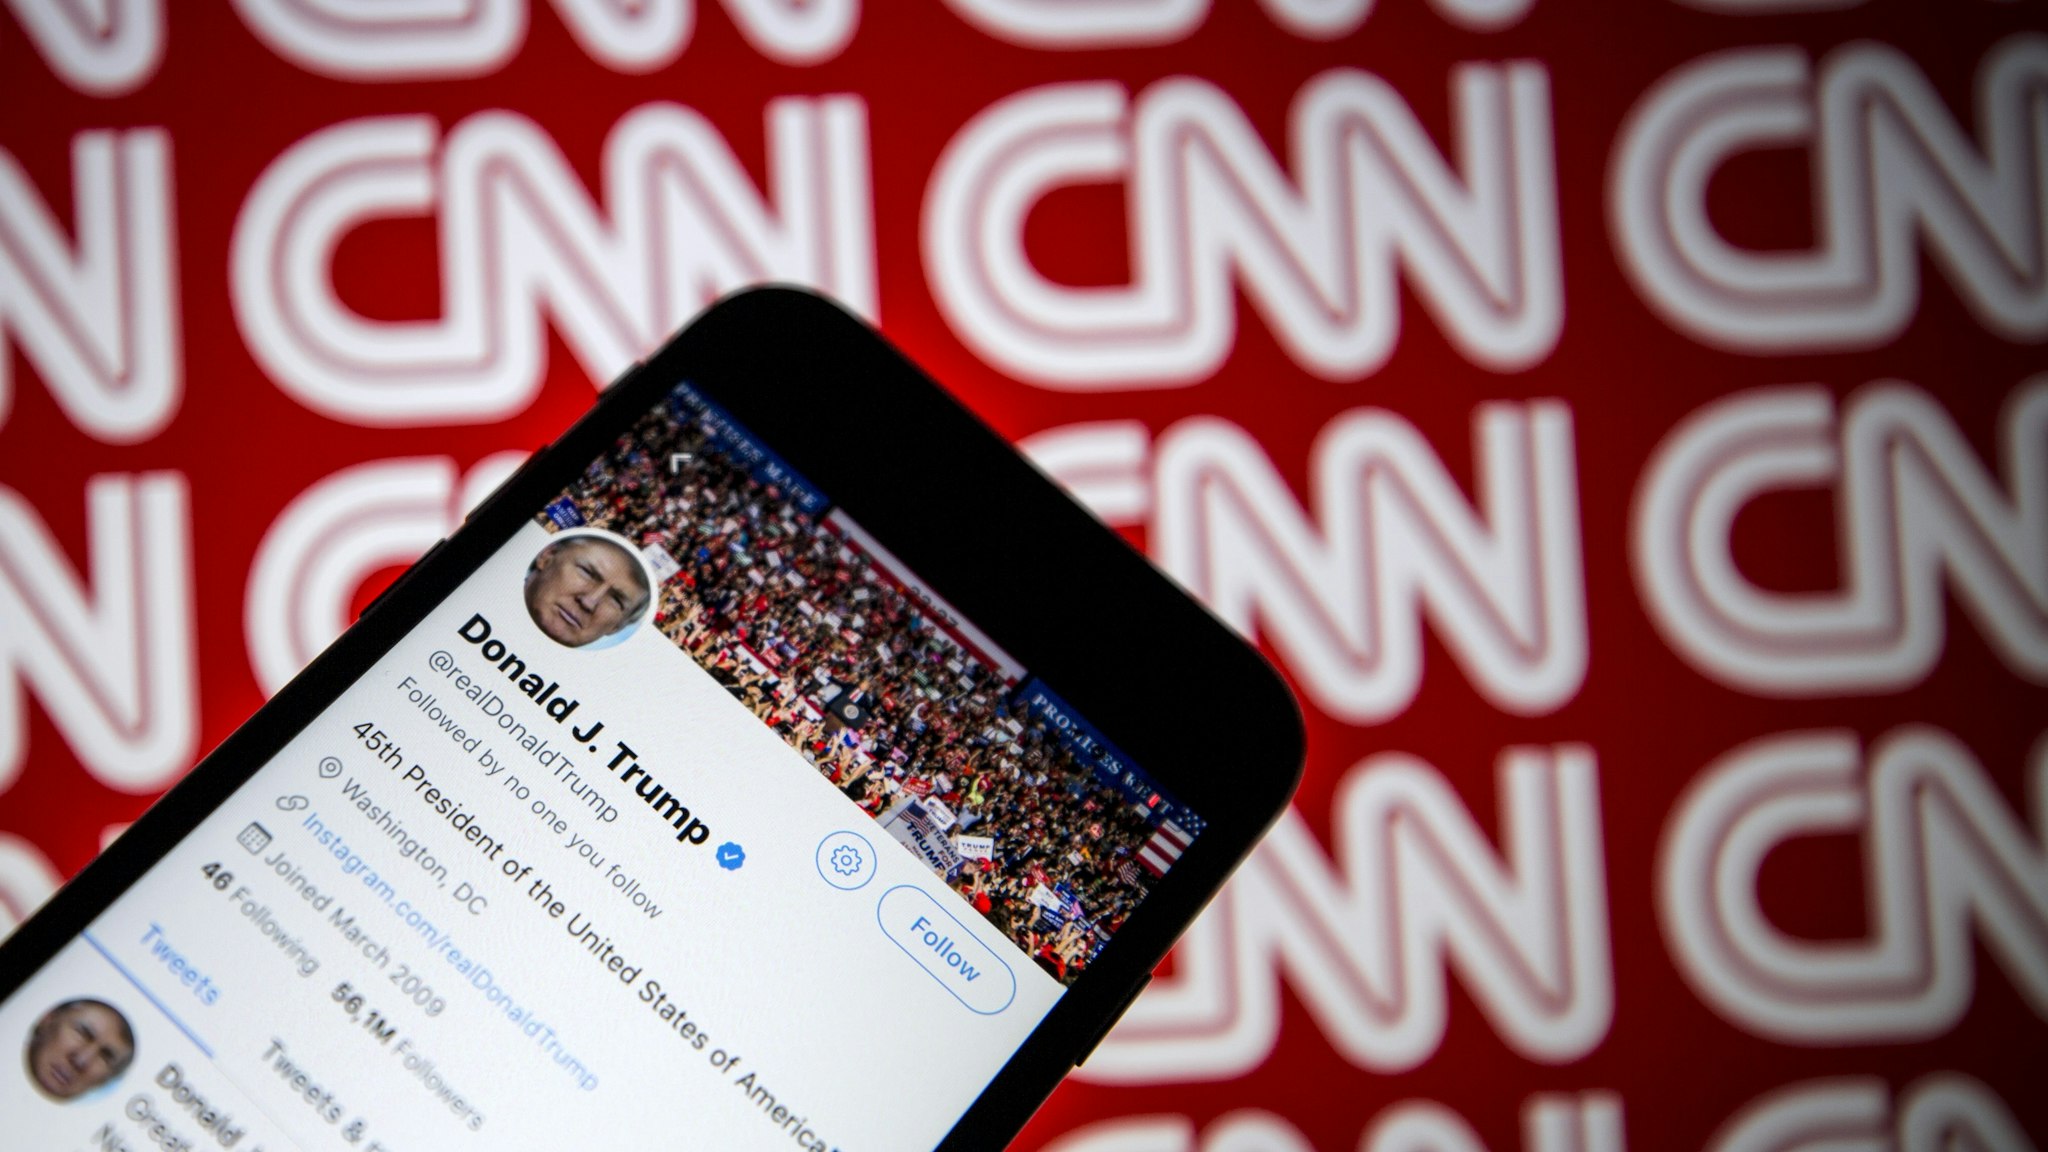 Donald Trump's Twitter profile is seen on a smartphone against a backdrop with the CNN logo, in Ankara, Turkey on December 9, 2018.